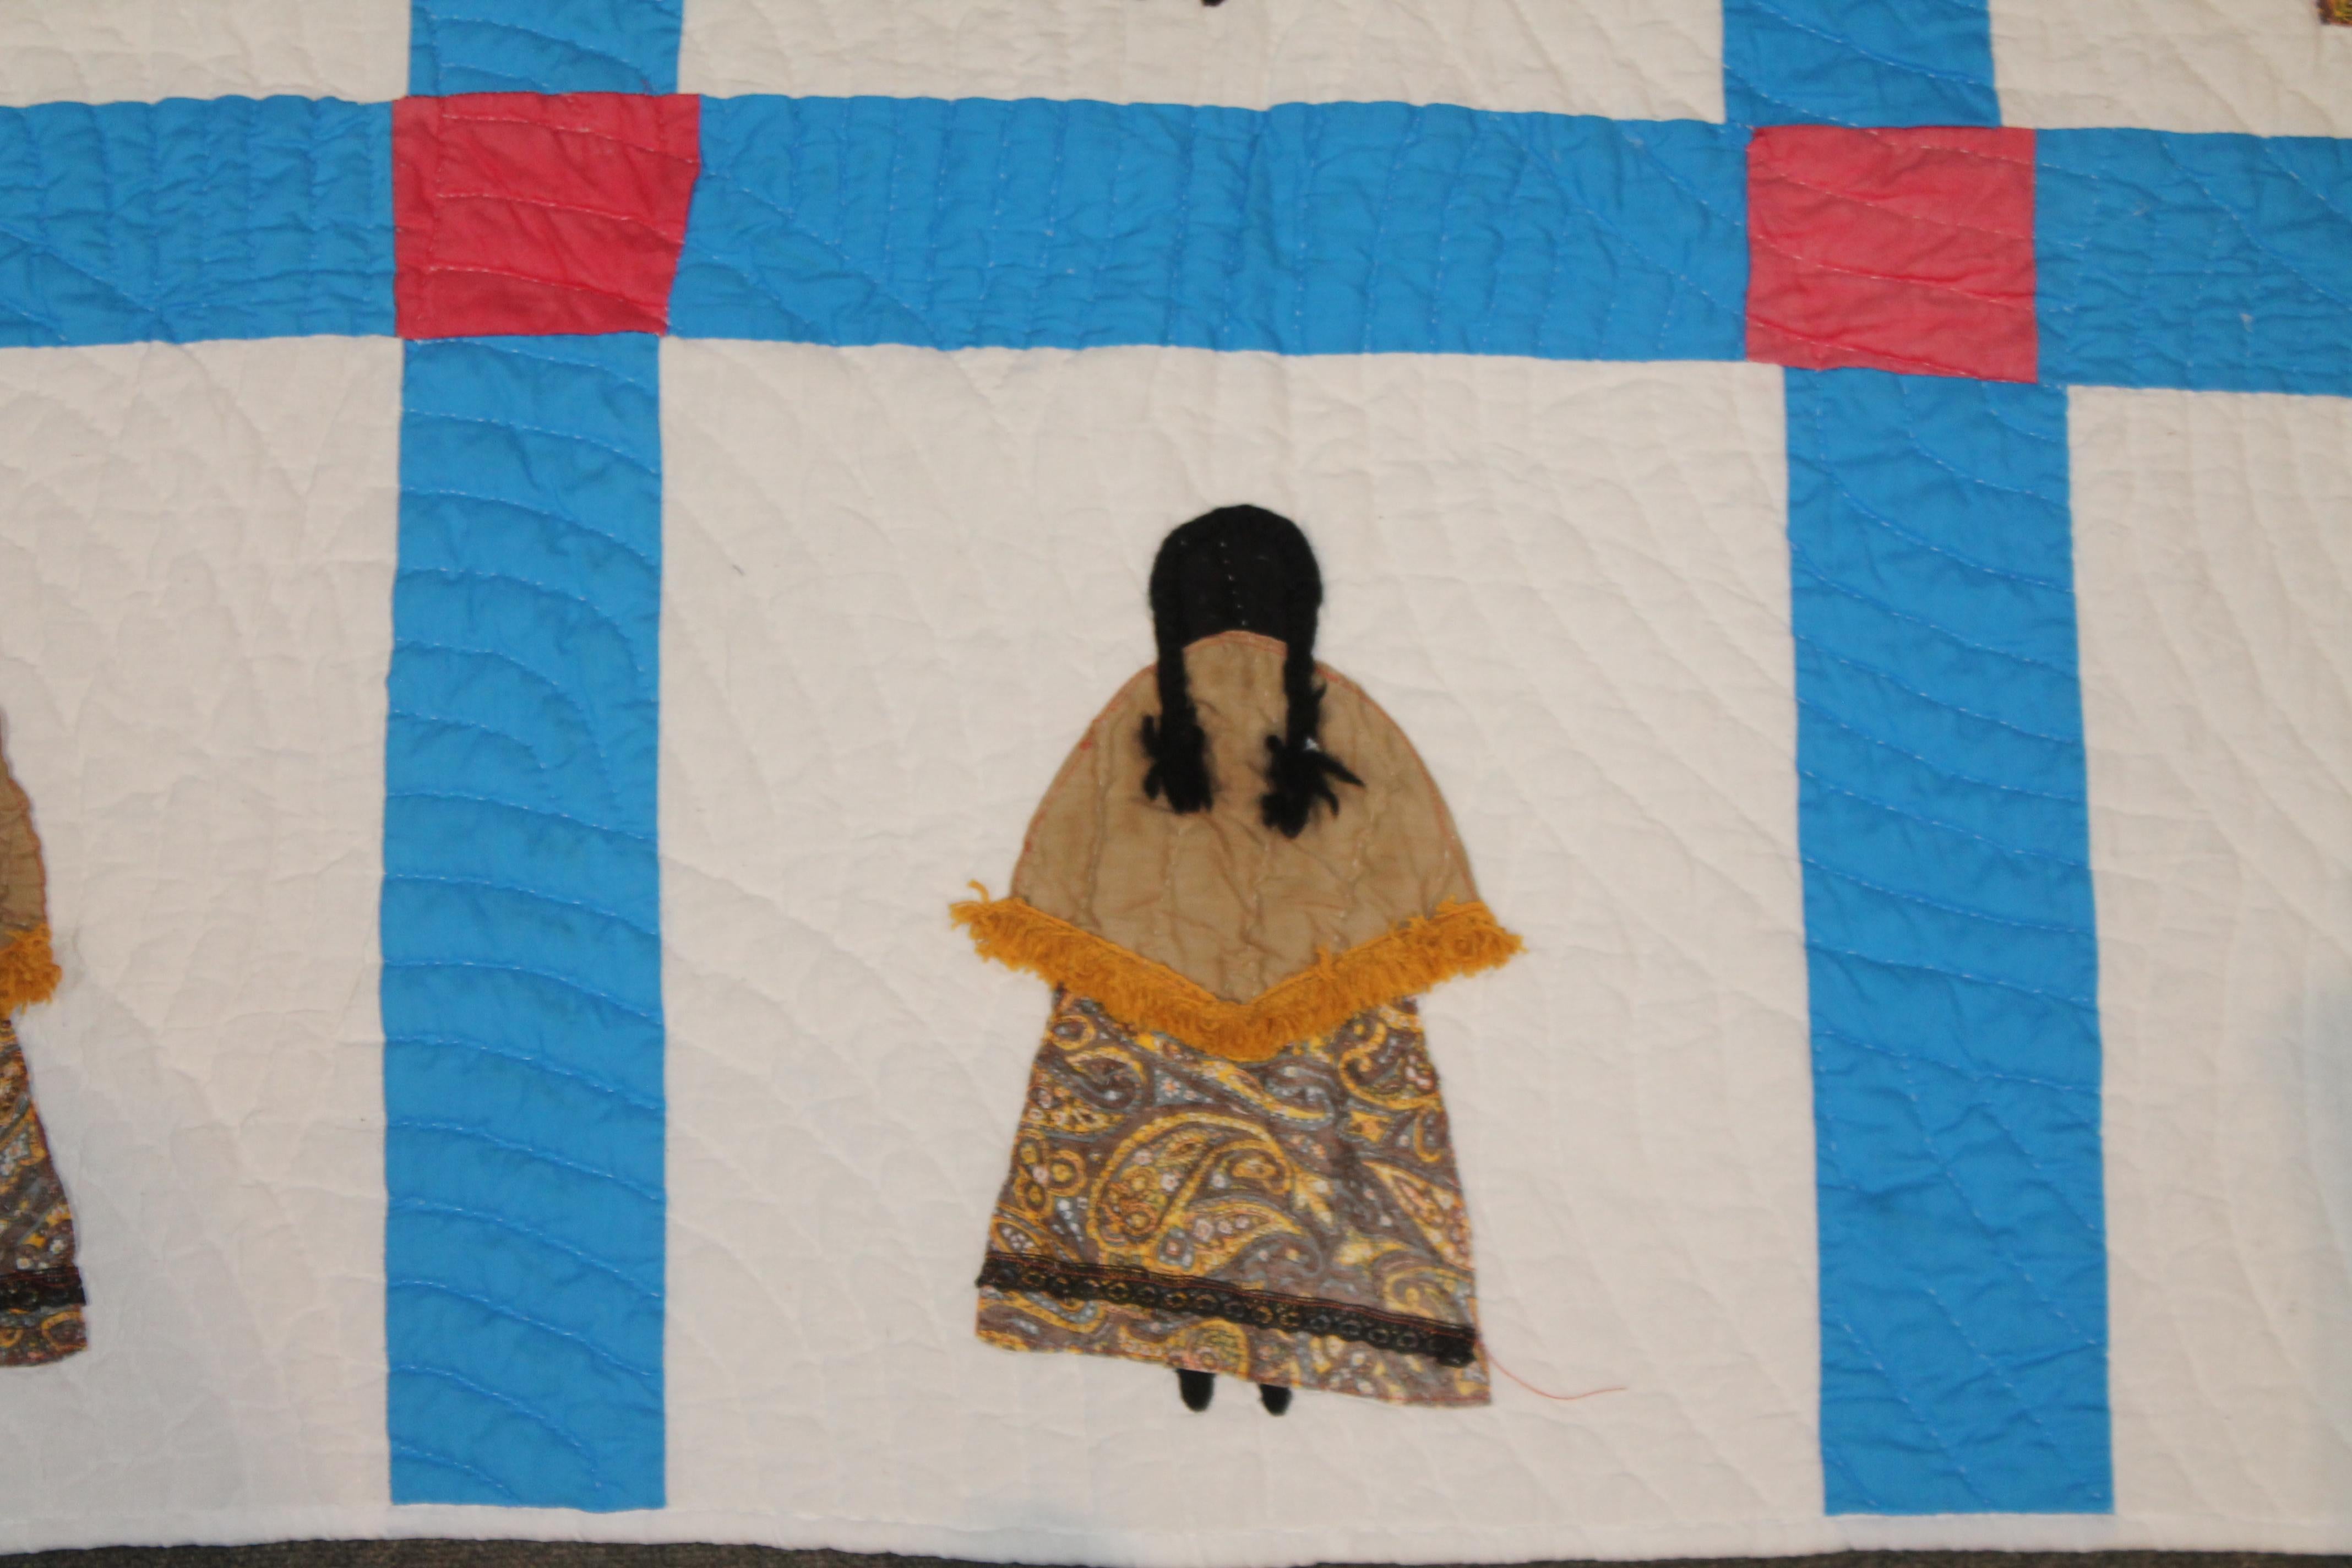 This folky Indian girl applique quilt is quite unusual and is in south western colors too. Great addition to any quilt of Folk Art collection. The condition is very good.